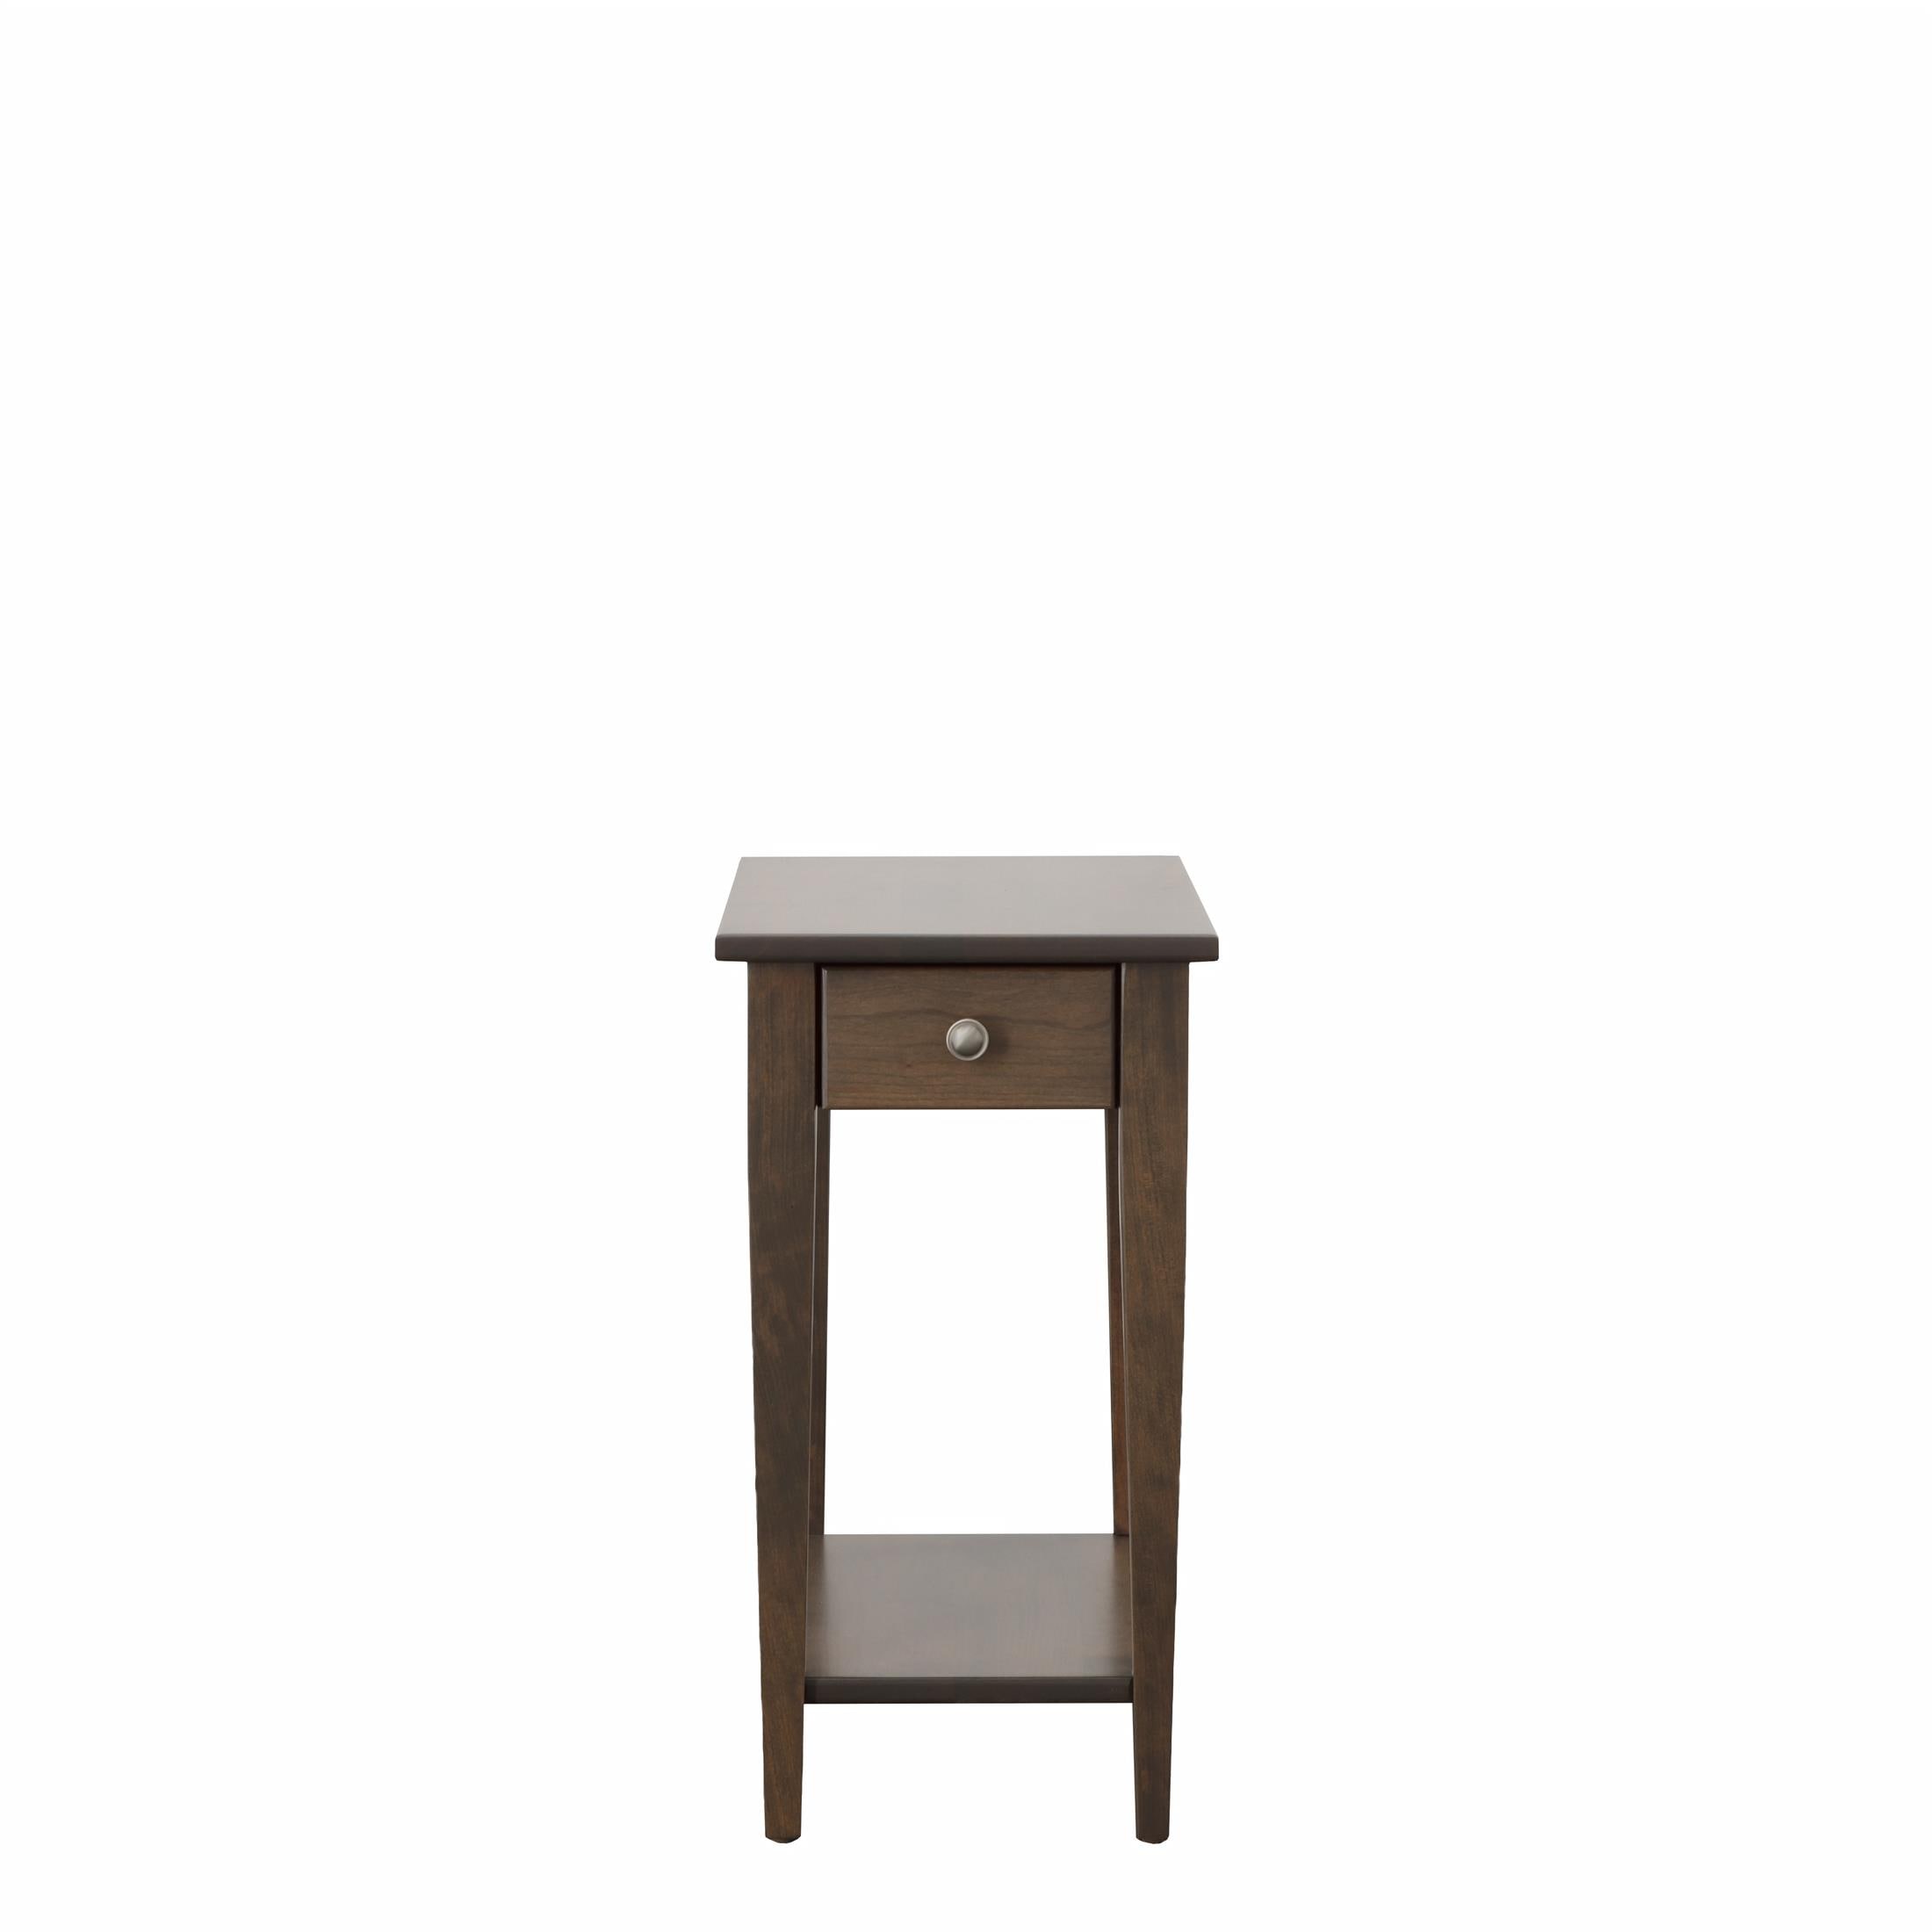 Urban Shaker Chairside End Table